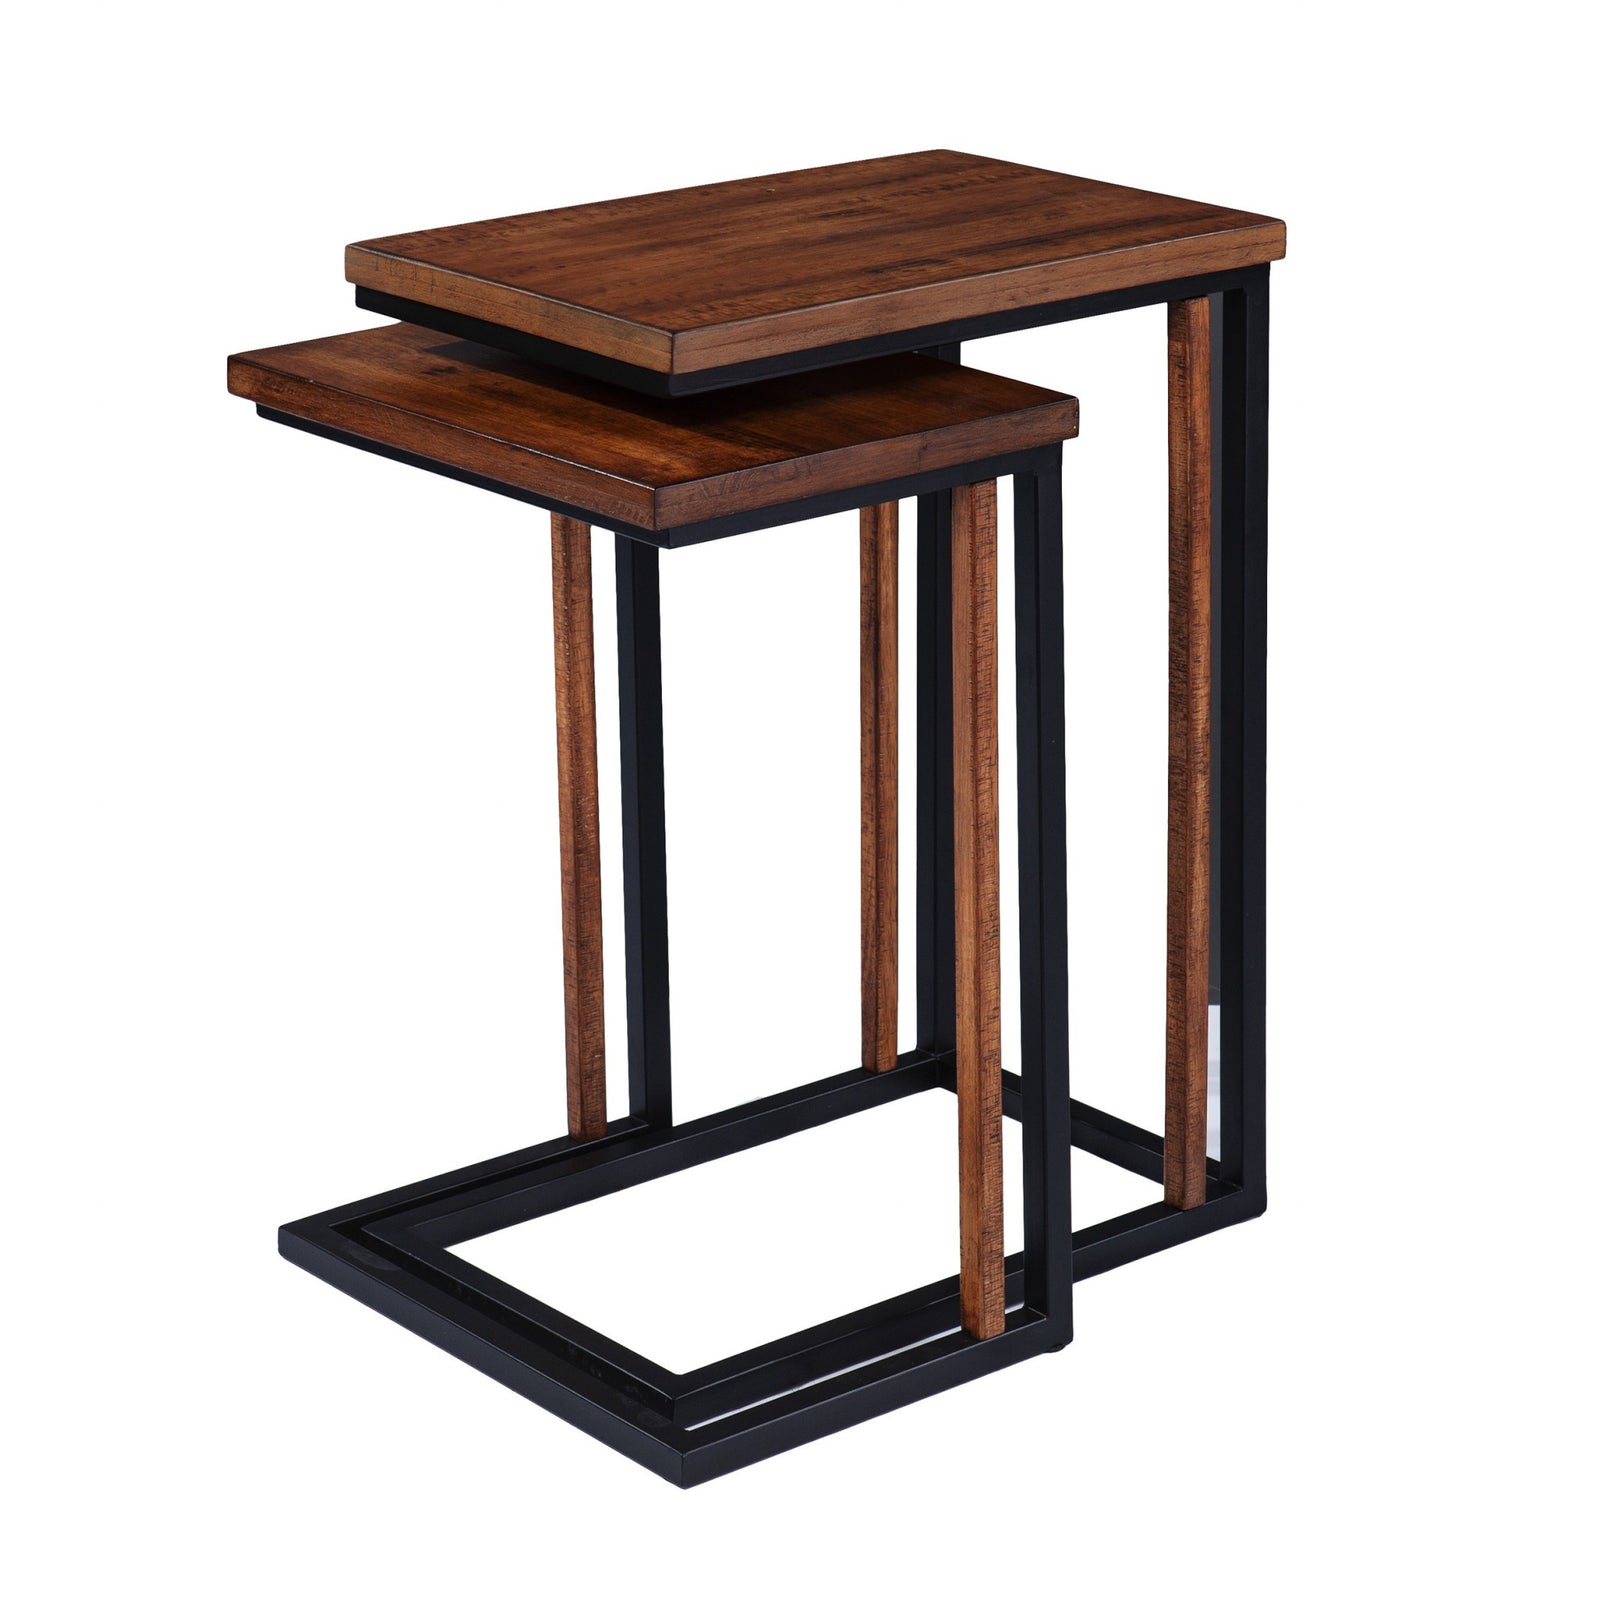 Brown Solid Wood Rectangular Nested End Tables Set Of Two 25"